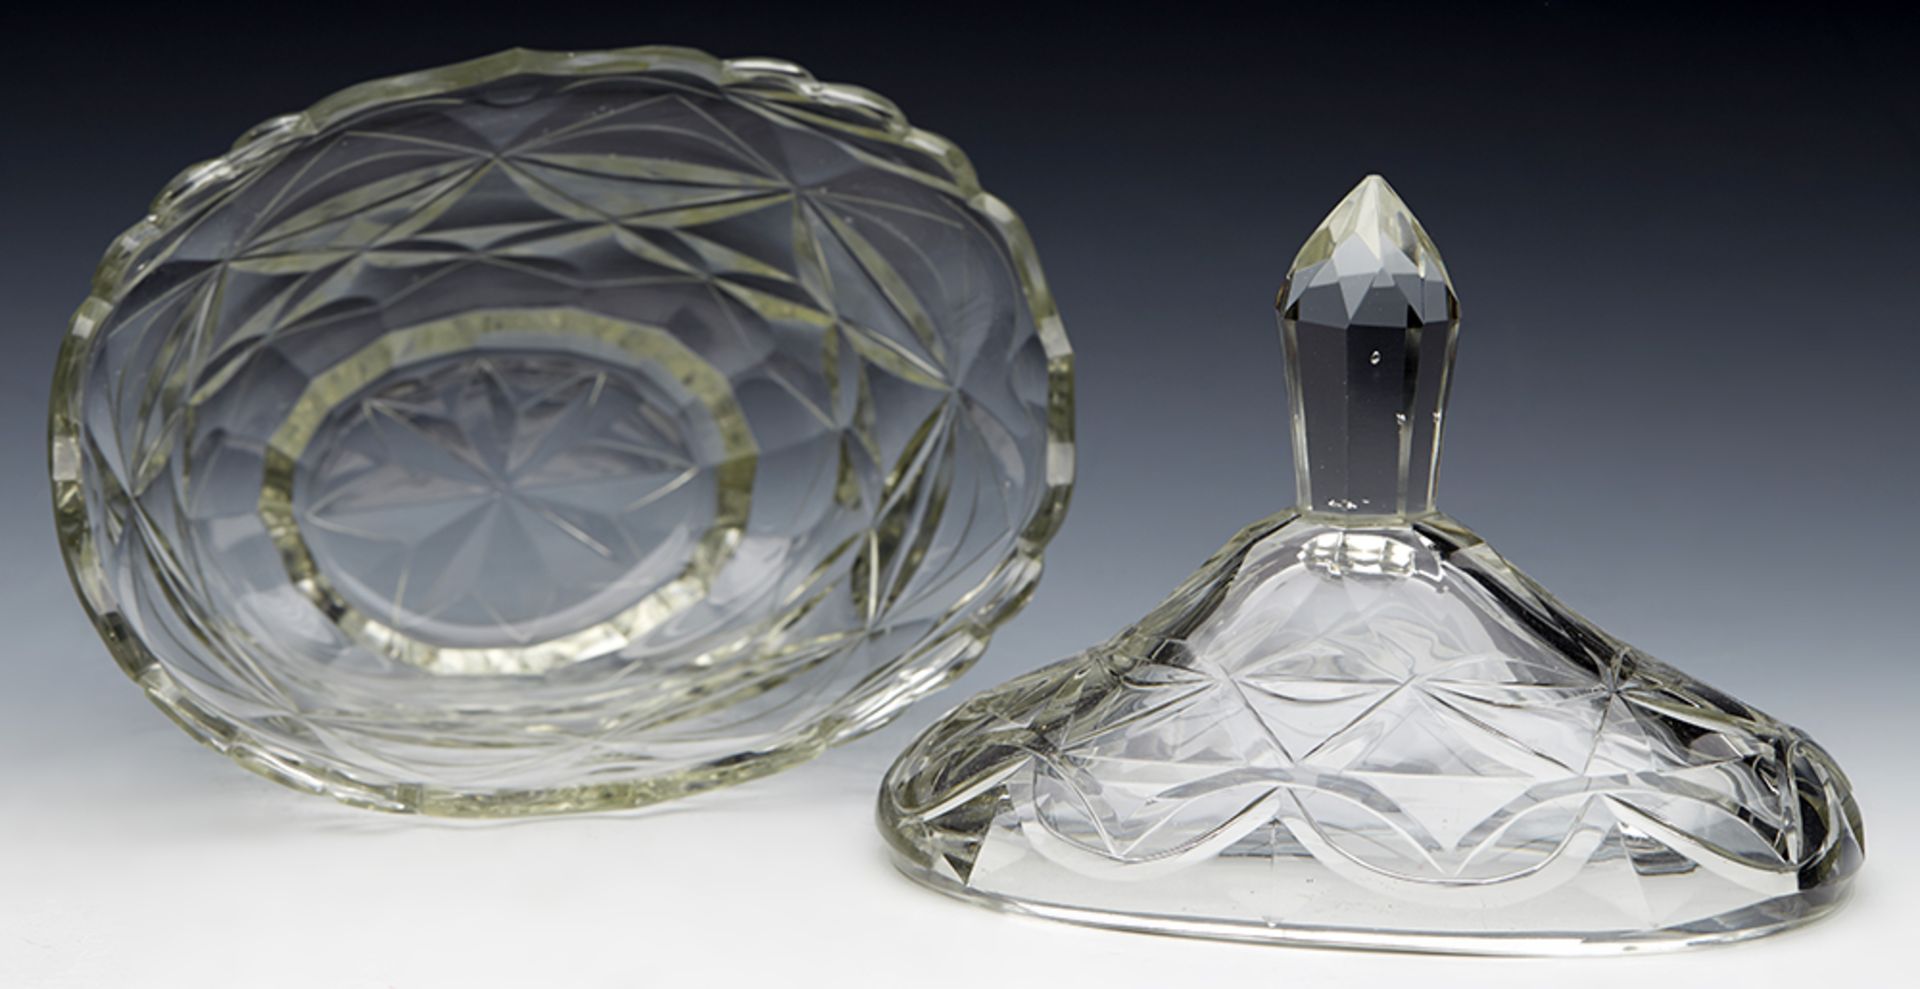 ANTIQUE CUT GLASS LIDDED BUTTER DISH AND STAND EARLY 19TH C.   DIMENSIONS   Height 19cm, Length 25, - Image 8 of 15